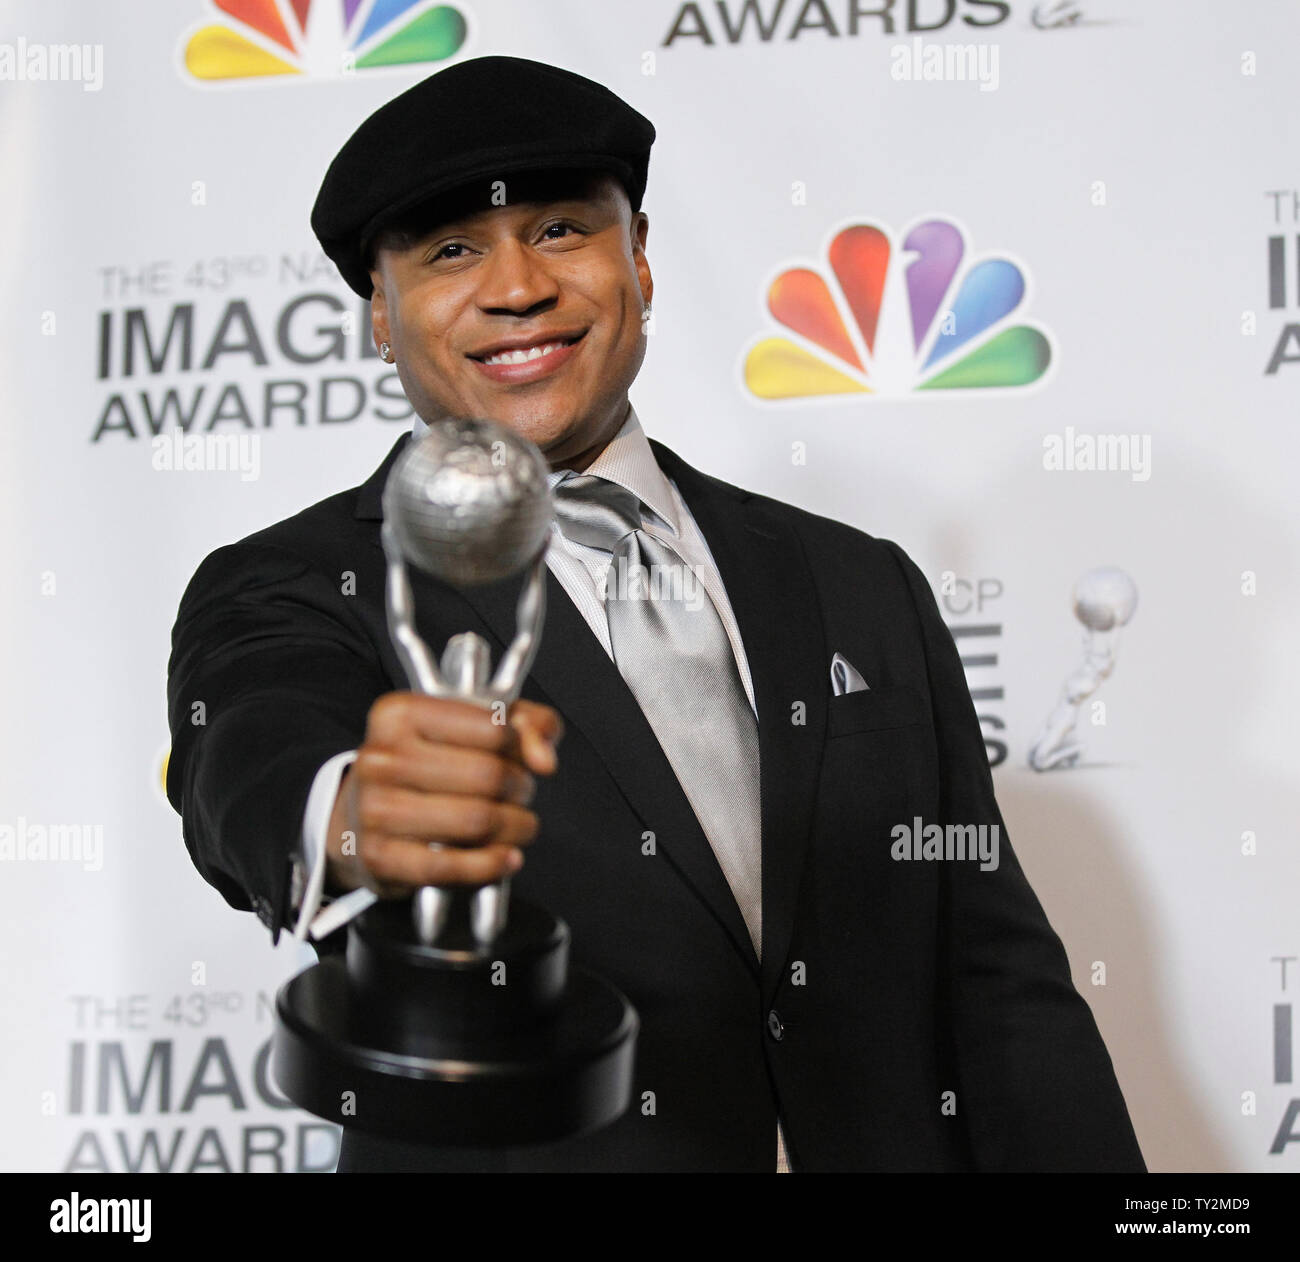 Actor LL Cool J holds his award for Outstanding Actor in a Drama Series for 'NCIS: Los Angeles' in the press room at the 43rd NAACP Image Awards at the Shrine Auditorium in Los Angeles on February 17, 2012.  UPI/Danny Moloshok Stock Photo